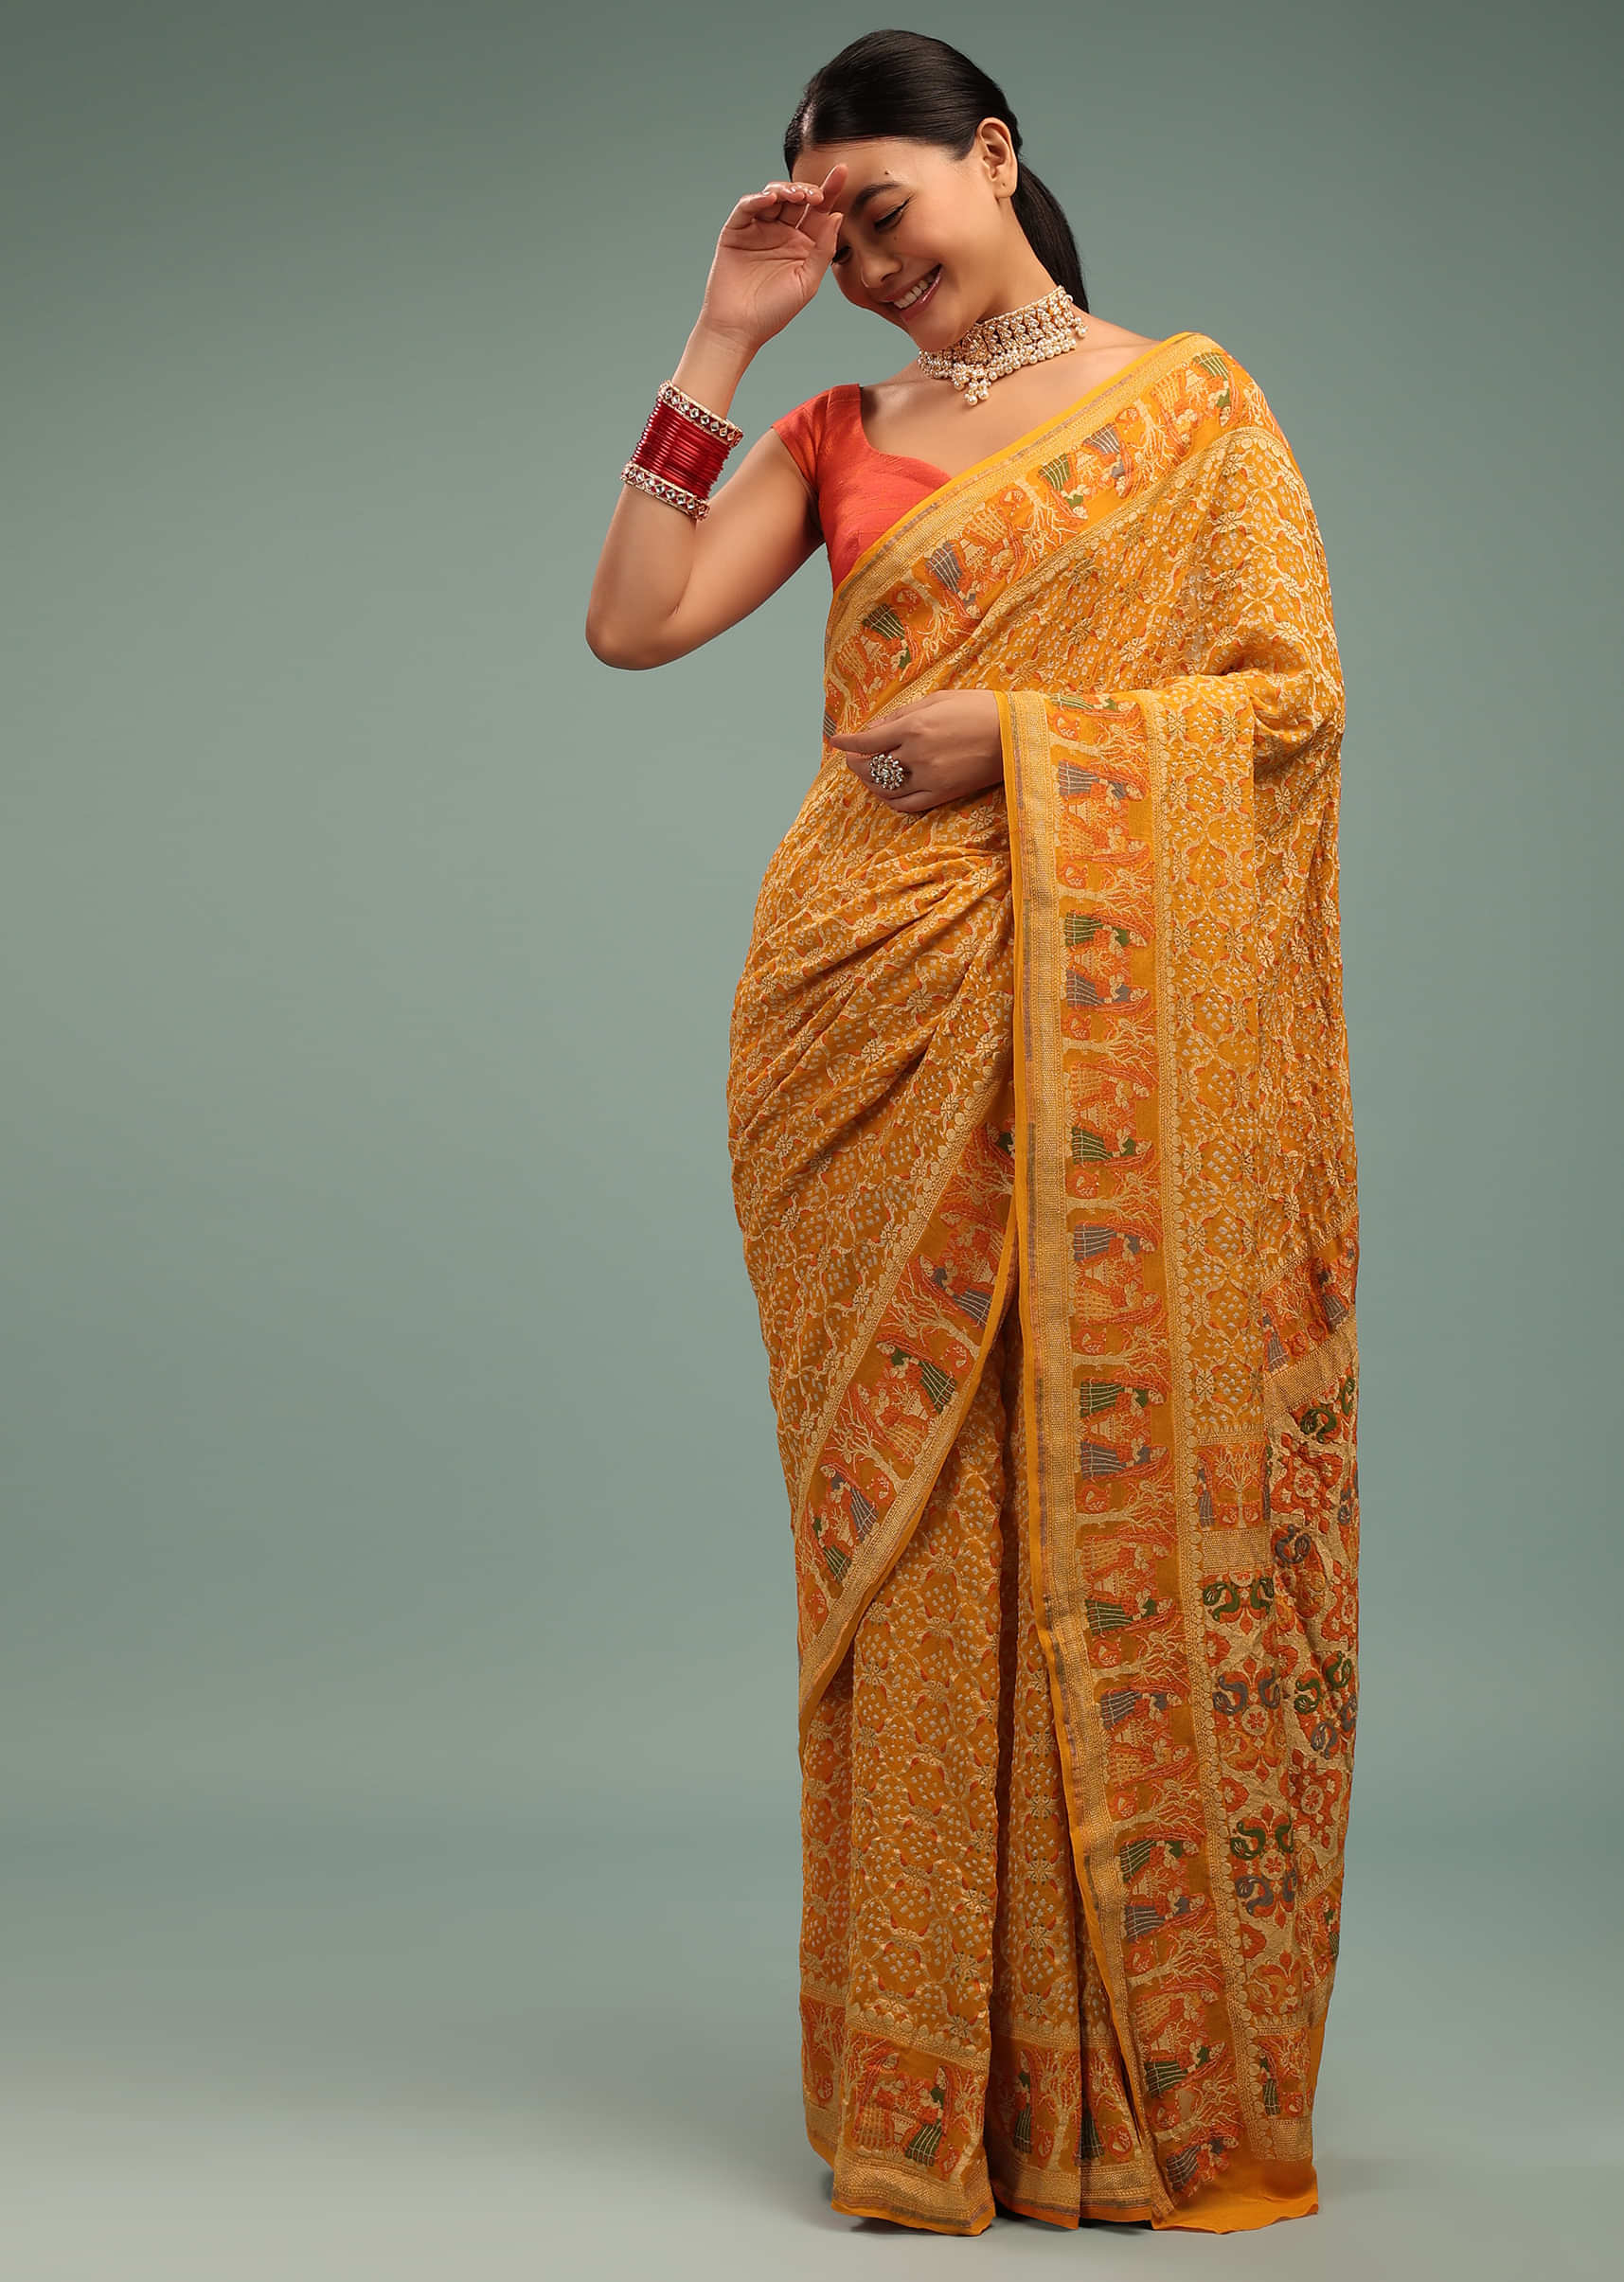 Kalki Authentic Apricot Yellow Saree In Georgette With Bandhani Handwoven Figure Work